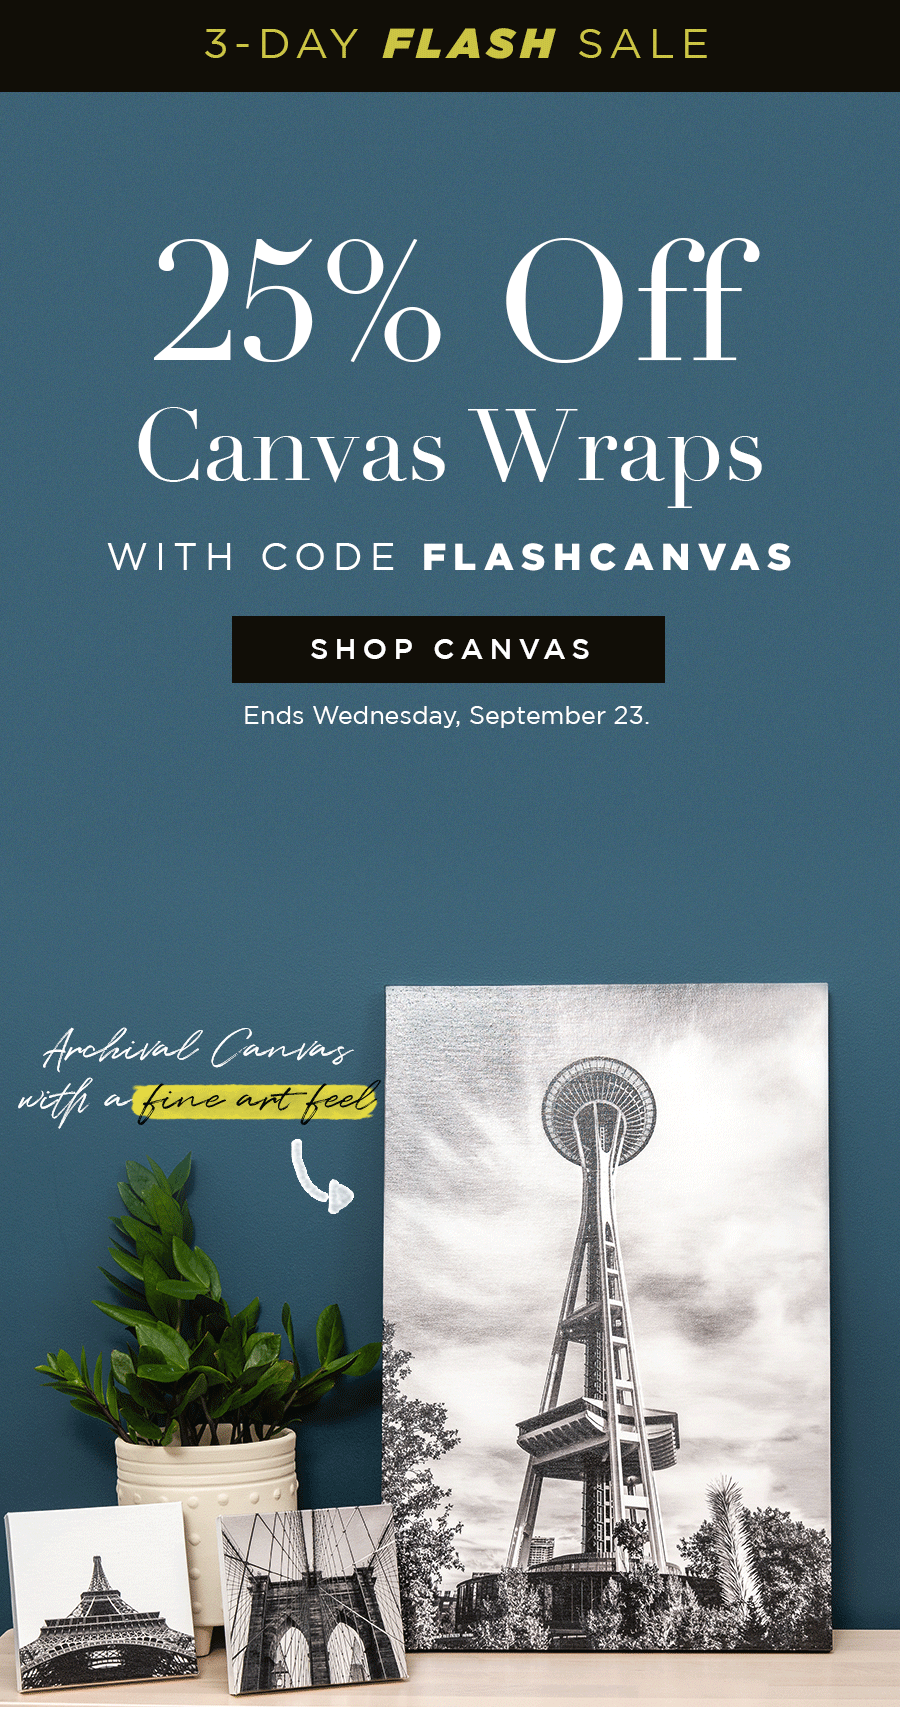 3-Day Flash Sale  25% Off Canvas Wraps with code FLASHCANVAS  + ARCHIVAL CANVAS WITH A FINE ART FEEL + PERFECT 90-DEGREE CORNERS + SOLID WOOD SURFACE FOR A LIFETIME OF HANGING  Ends Wednesday, September 23.